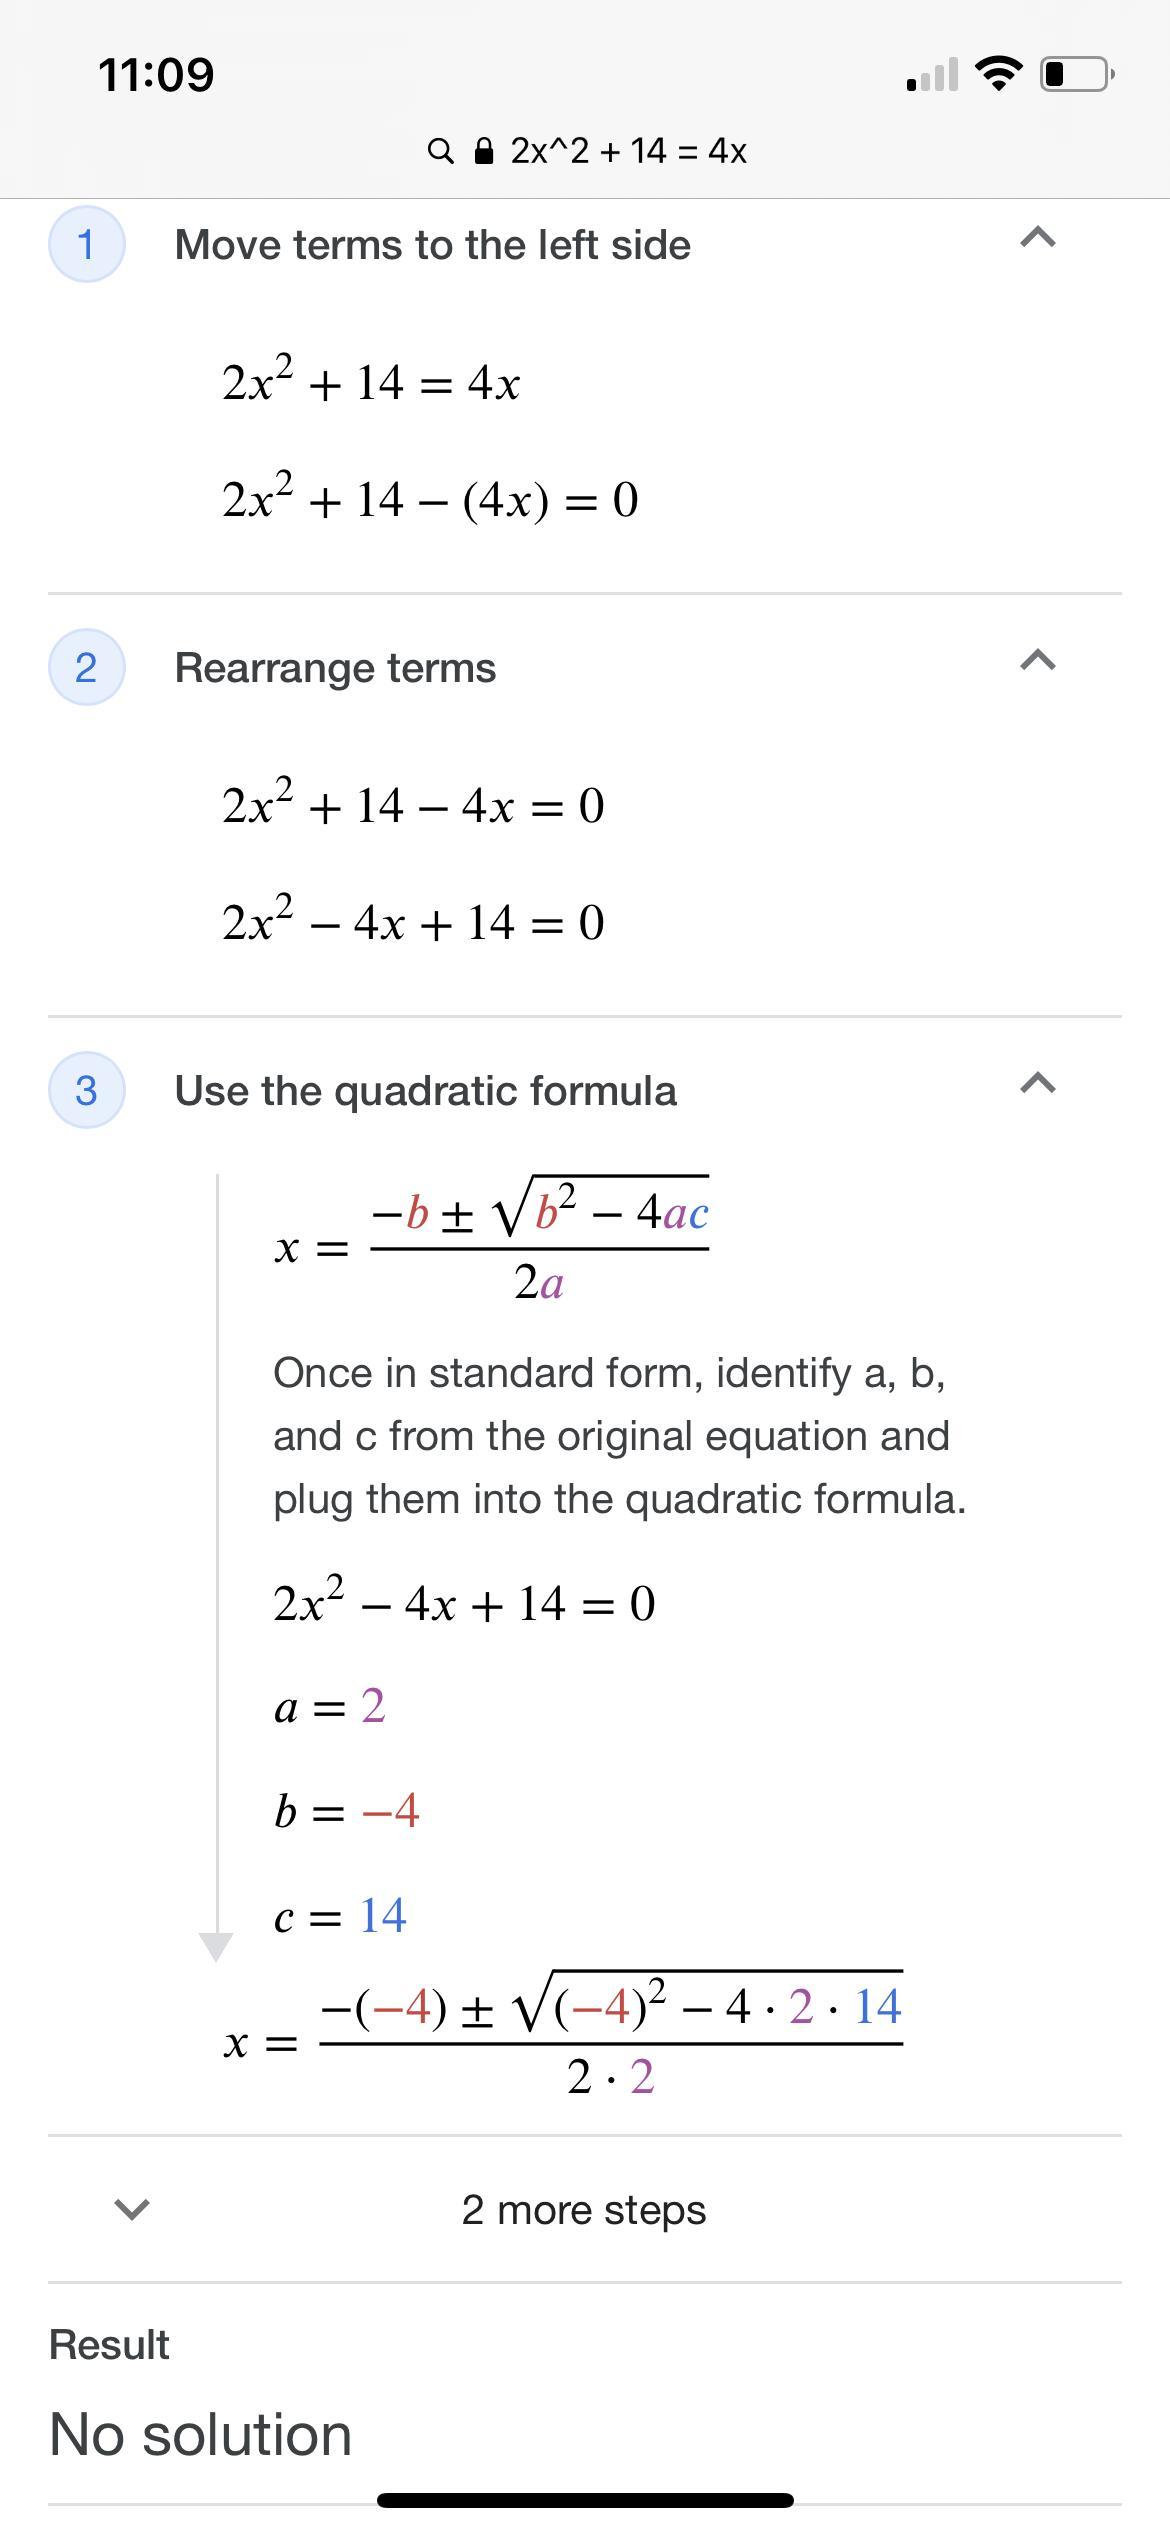 Solve By Completing The Square2x^2 + 14 = 4x